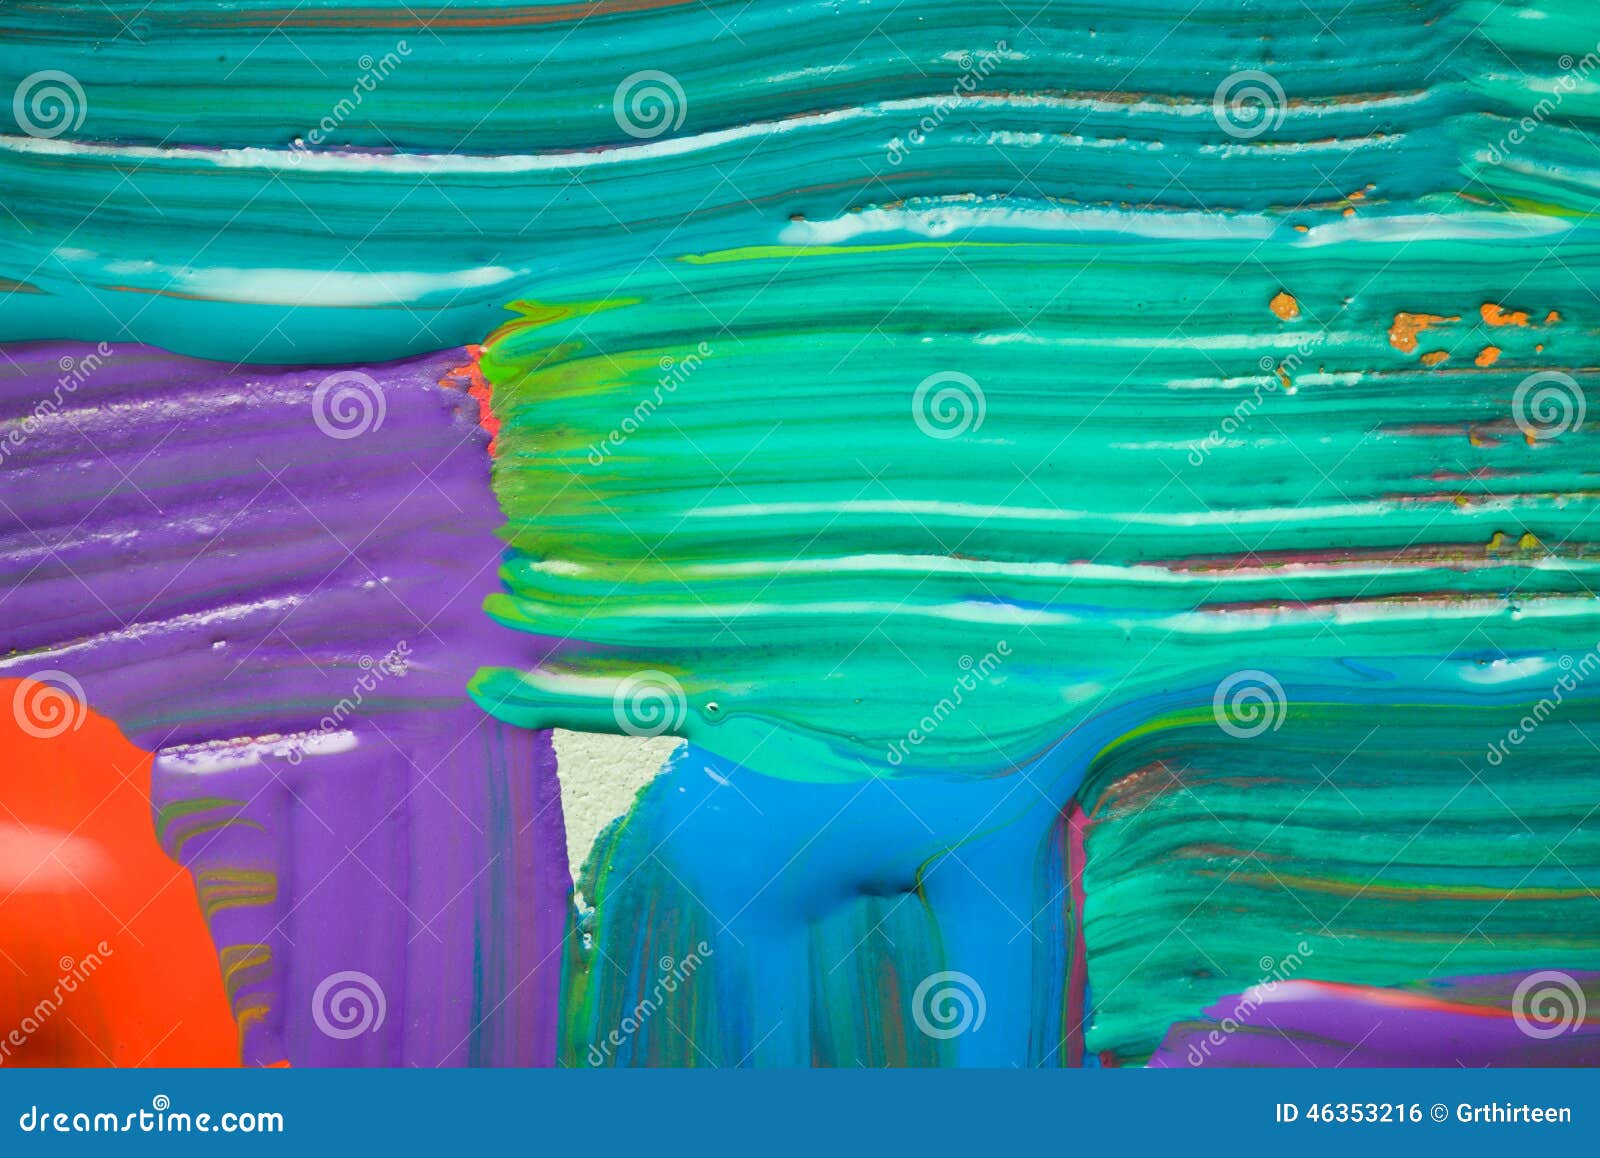 Abstract art background stock photo. Image of homemade - 46353216